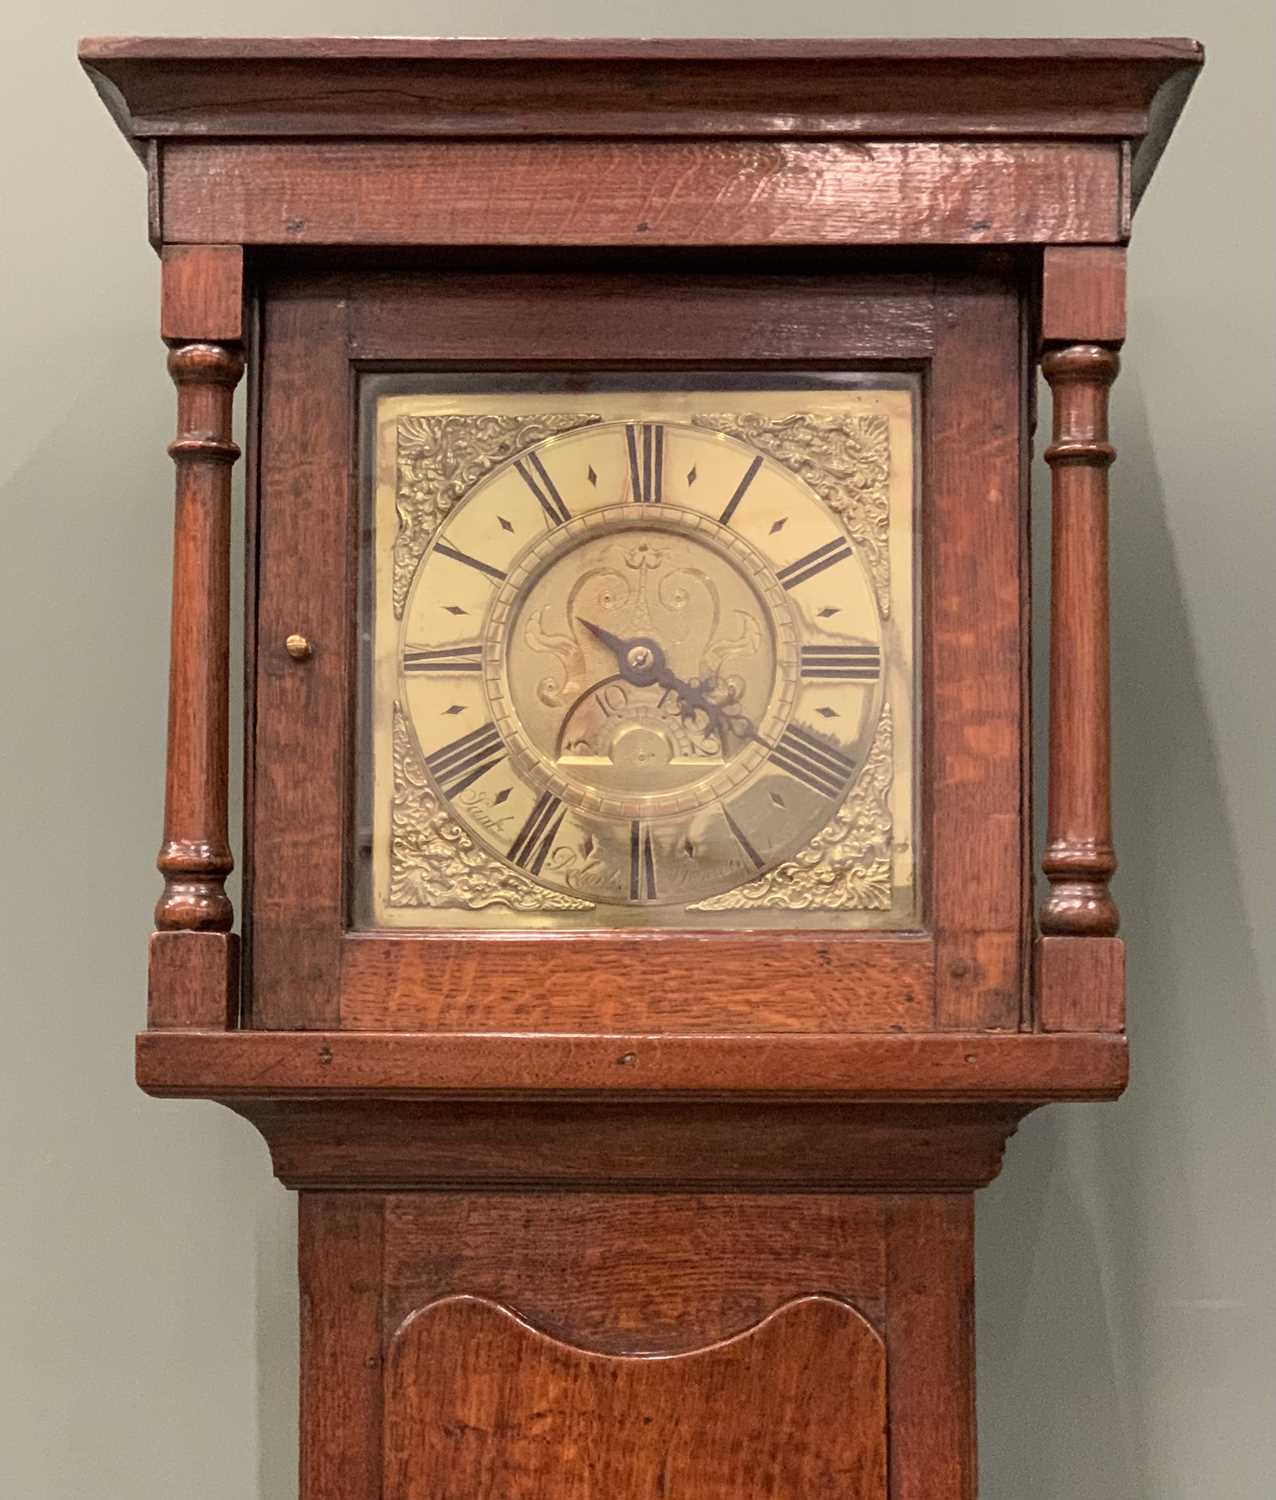 18TH CENTURY LONGCASE CLOCK BY SAMUEL ROBERTS, LLANFAIR, numbered 189 to the dial, 9 ¾ inch square